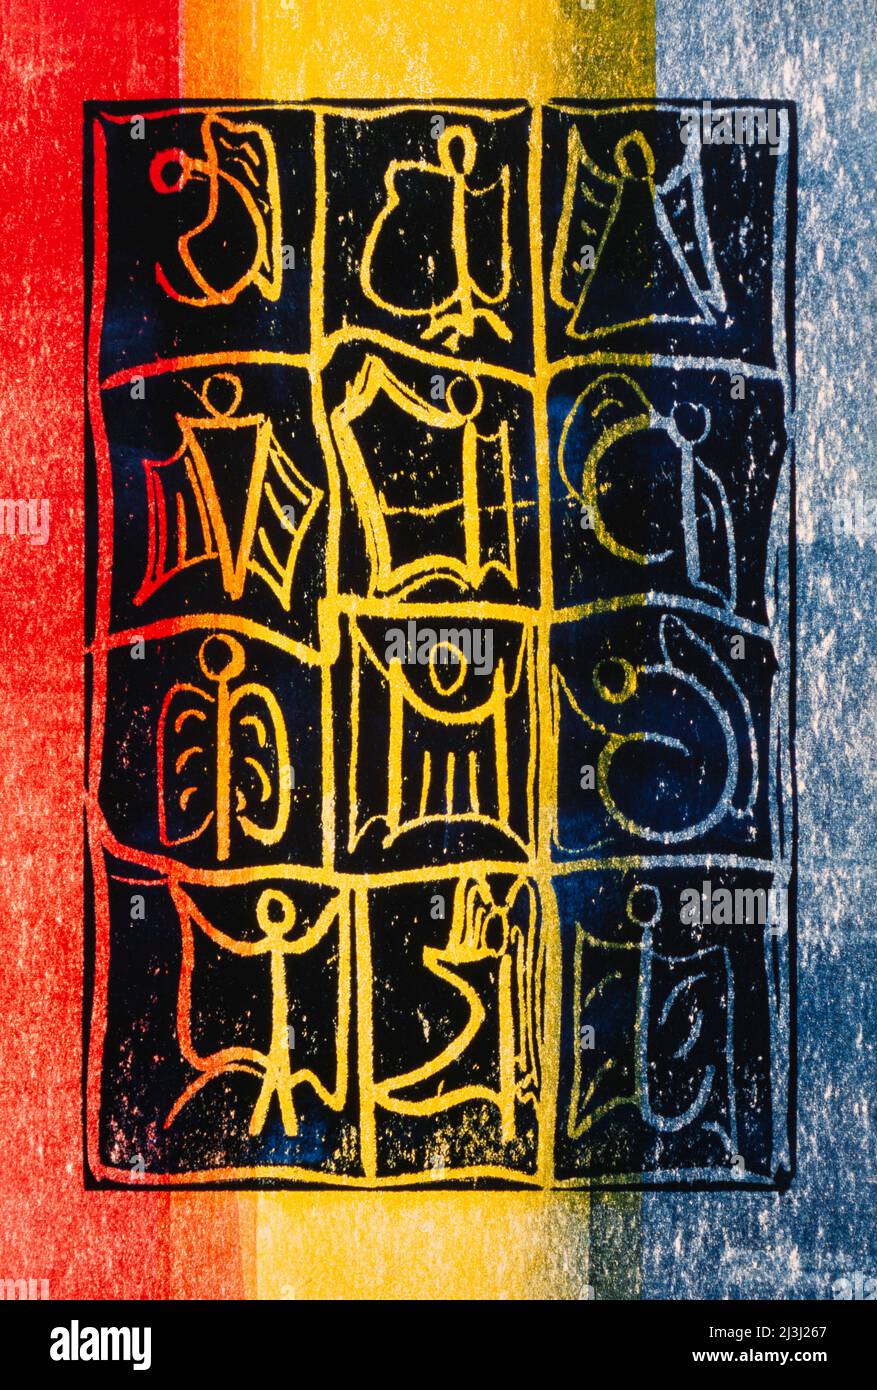 Graphic print by Gisela Oberst Twelve angels, abstract, red, yellow, blue, angel figure, angel representation, winged, mystical, heavenly beings Stock Photo